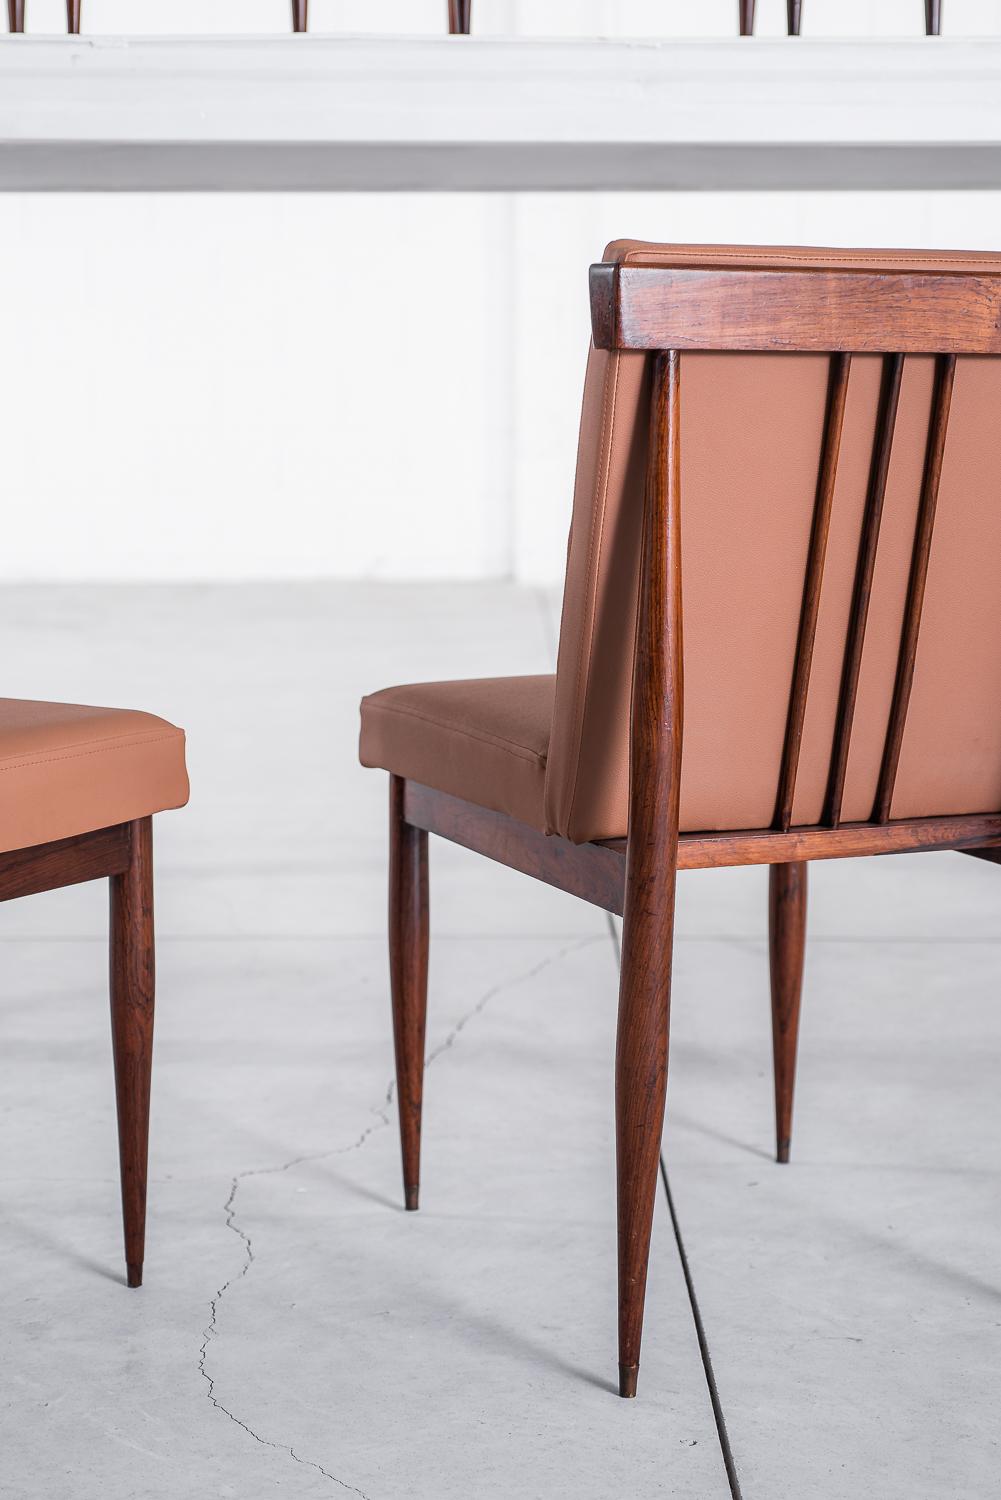 Brazilian Set of Ten Dining Chairs by Novo Rumo, Solid Rosewood, 1950s